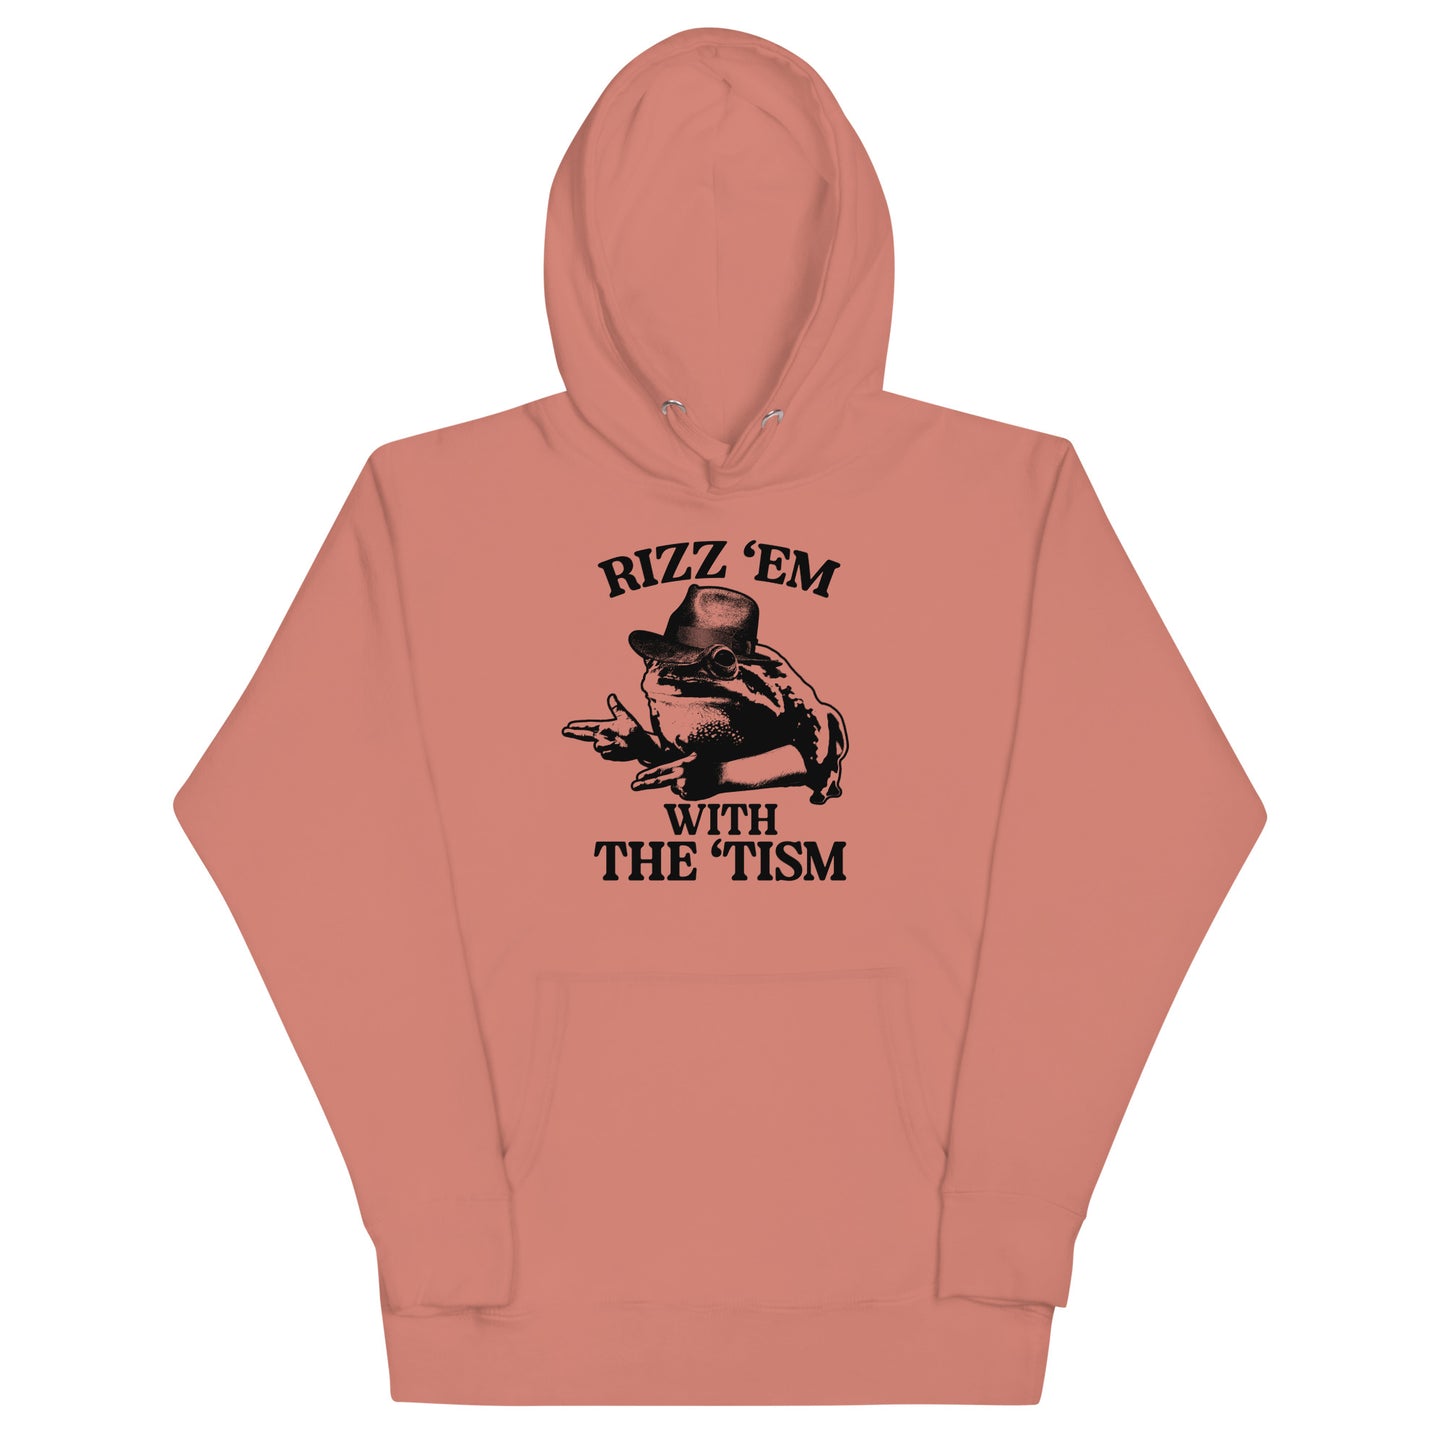 Rizz 'Em With the 'Tism (Frog) Unisex Hoodie